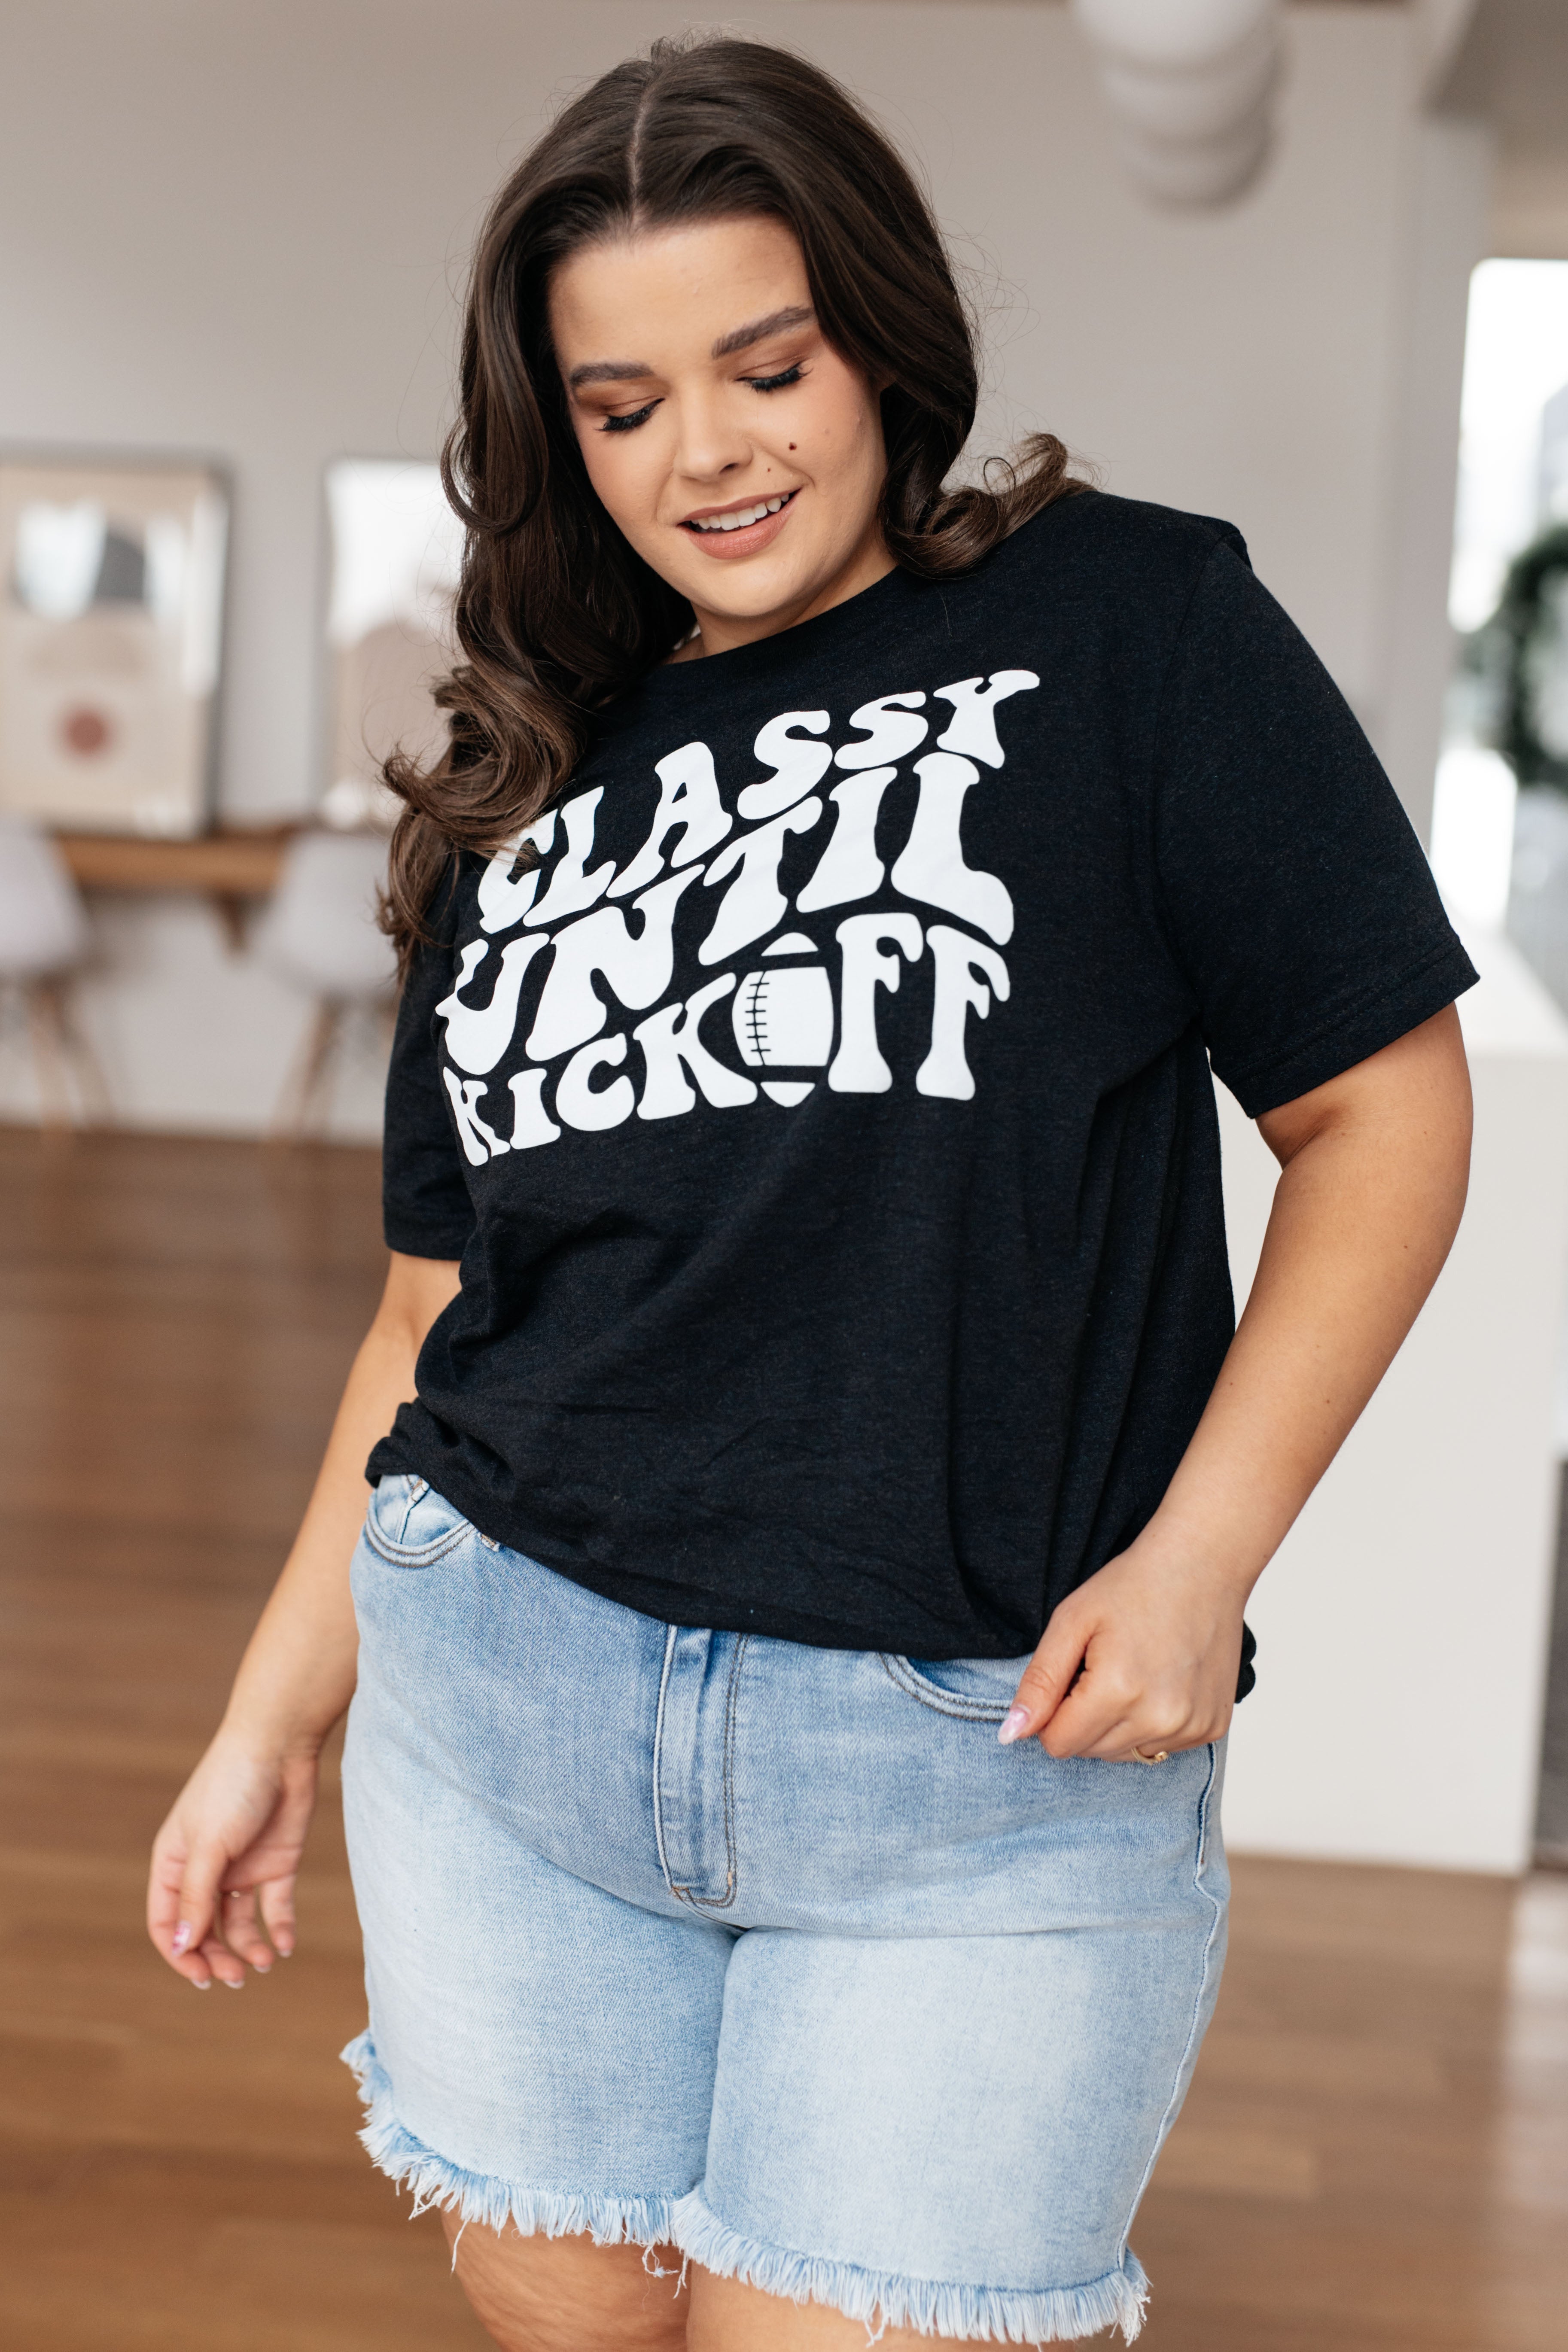 Classy Until Kickoff Graphic Tee Womens Ave Shops   